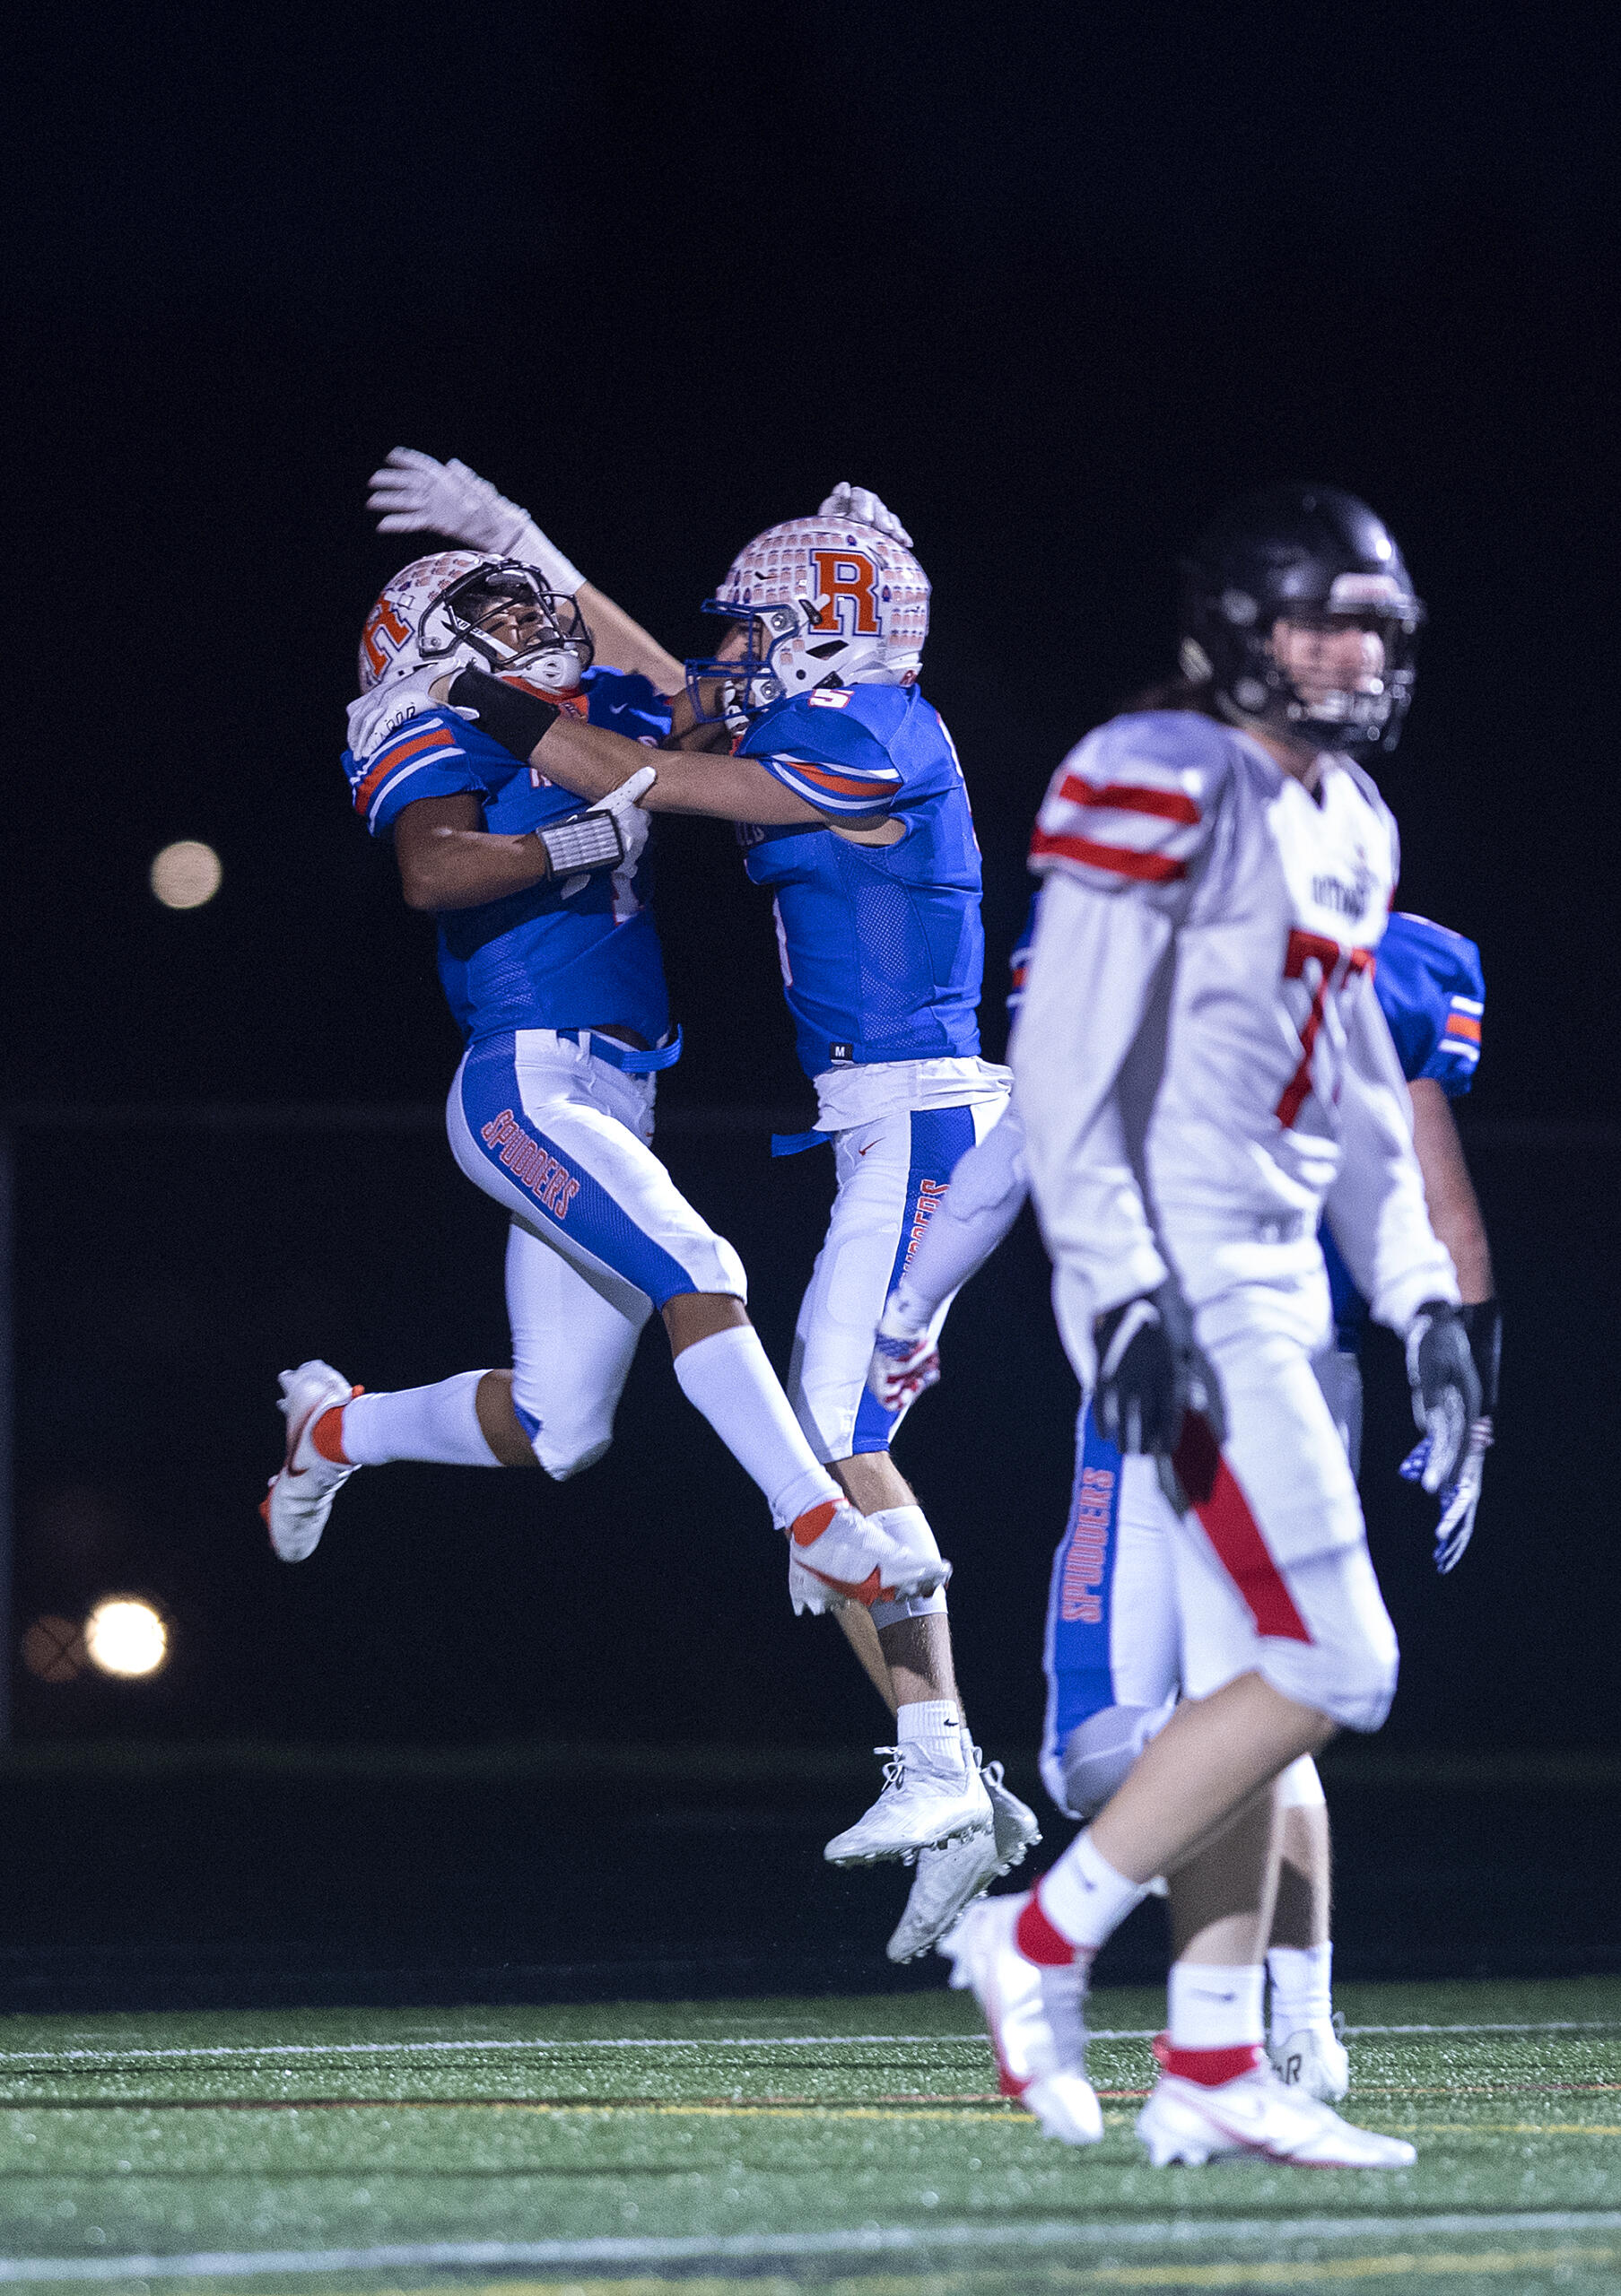 Ridgefield's Isaiah Cowley (1) celebrates his touchdown in the first quarter with teammate Ty Snider at Ridgefield High School on Saturday night, Nov. 13, 2021.